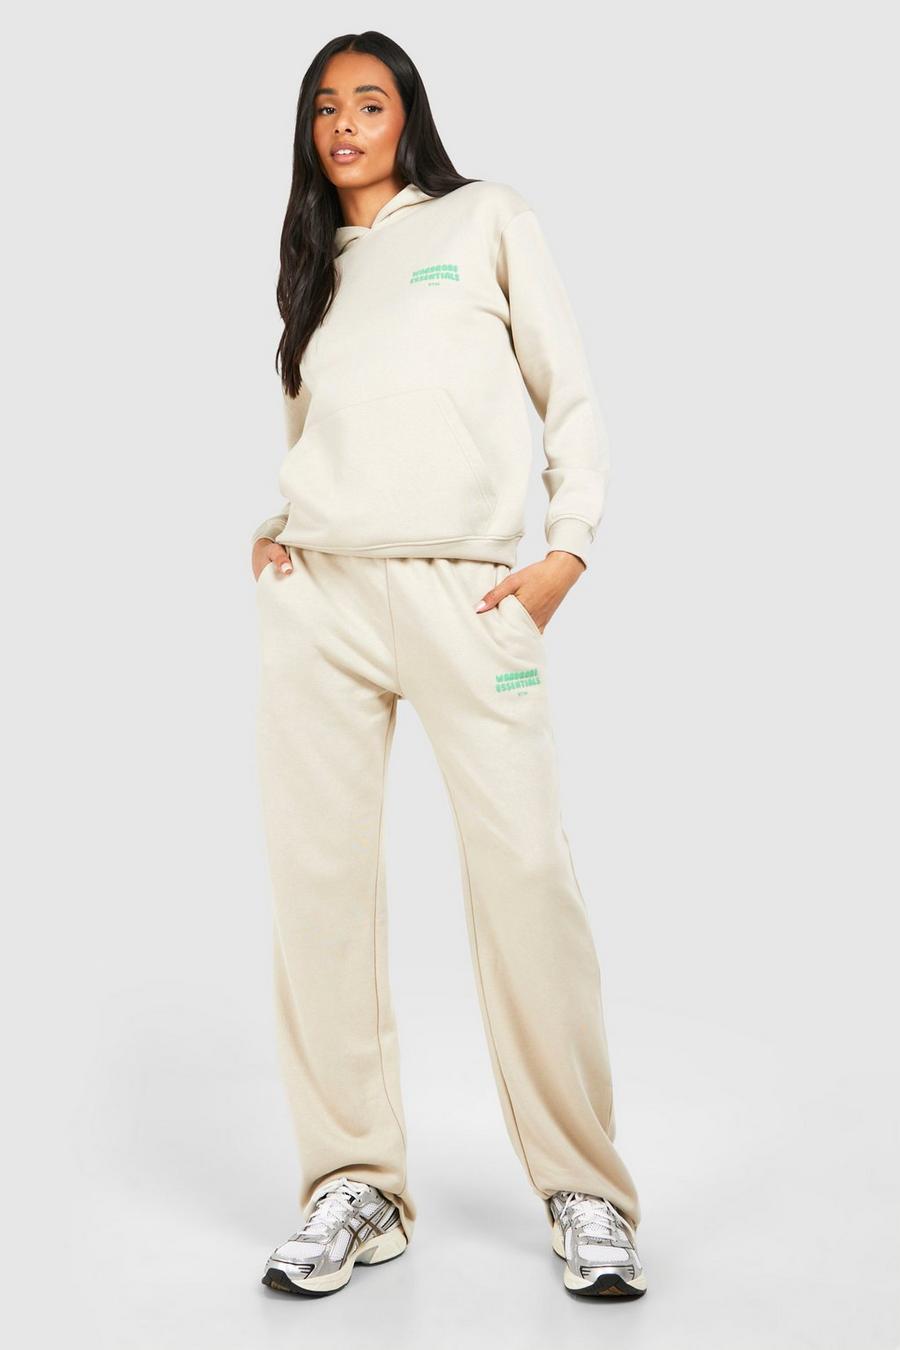 Tall Tracksuits, Tall Sweatsuit & Jogging Suit For Women